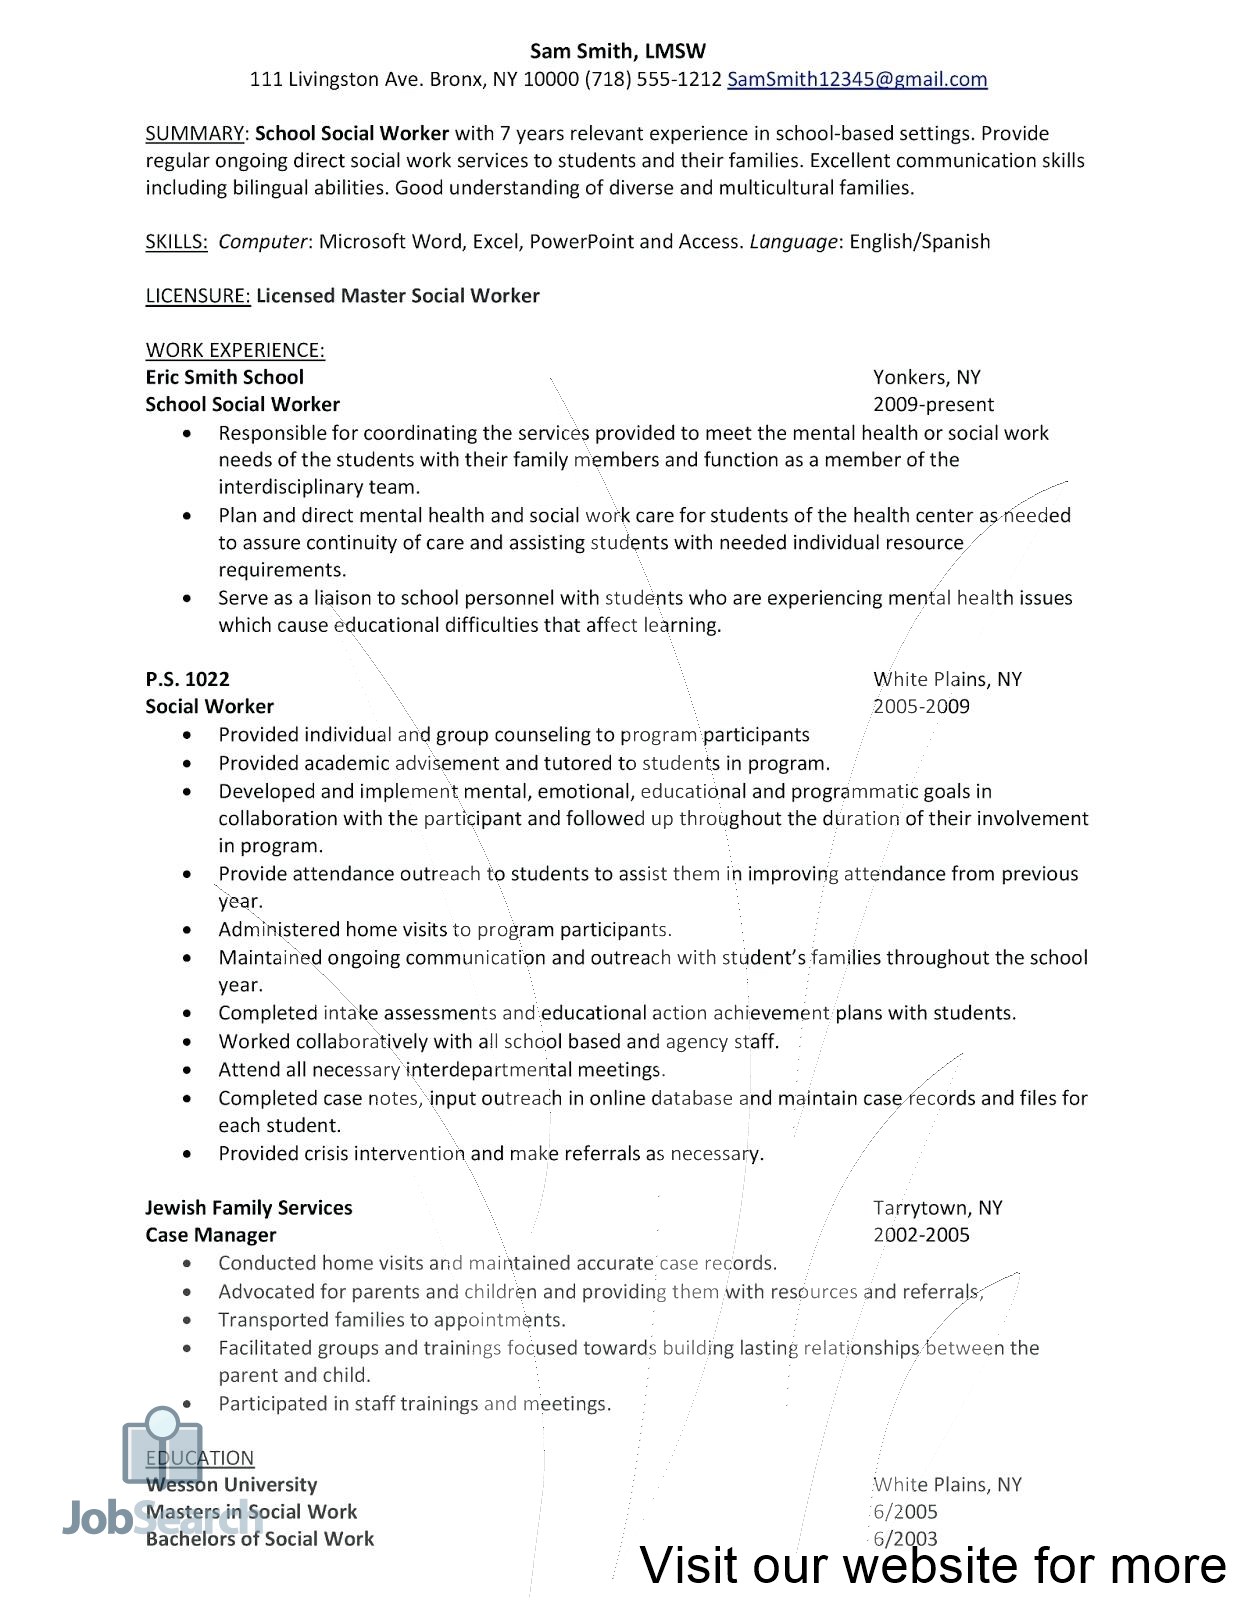 example resumes for jobs example resume for jobs example resumes for jobs without experience example resume for job example resume for job application sample resume for usa jobs